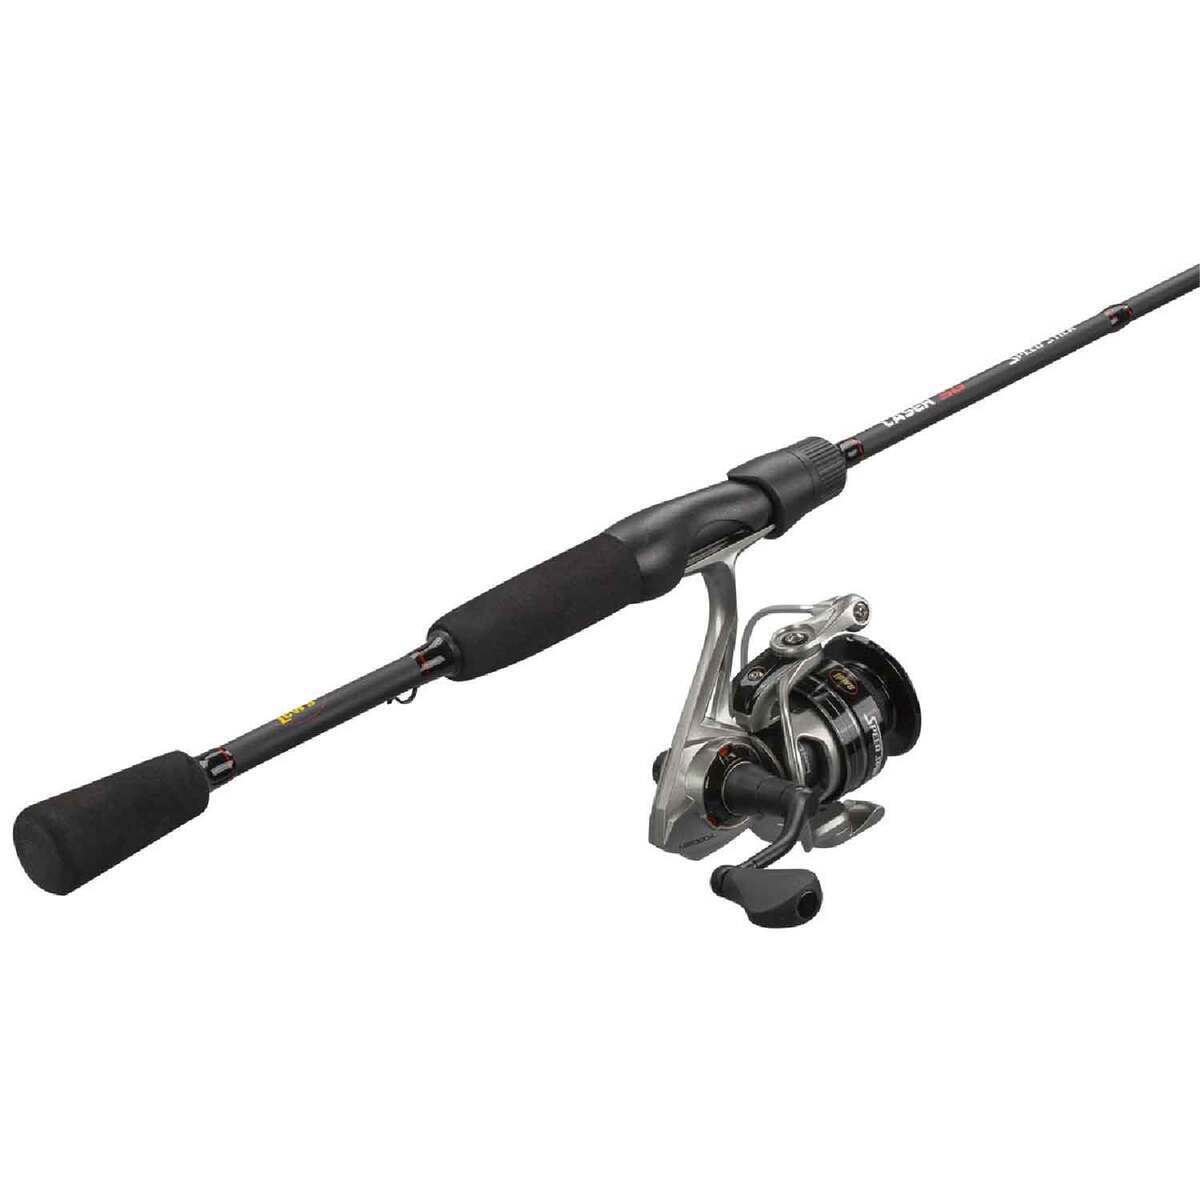 Lew's Super Lite Spinning Combo - 10 by Sportsman's Warehouse